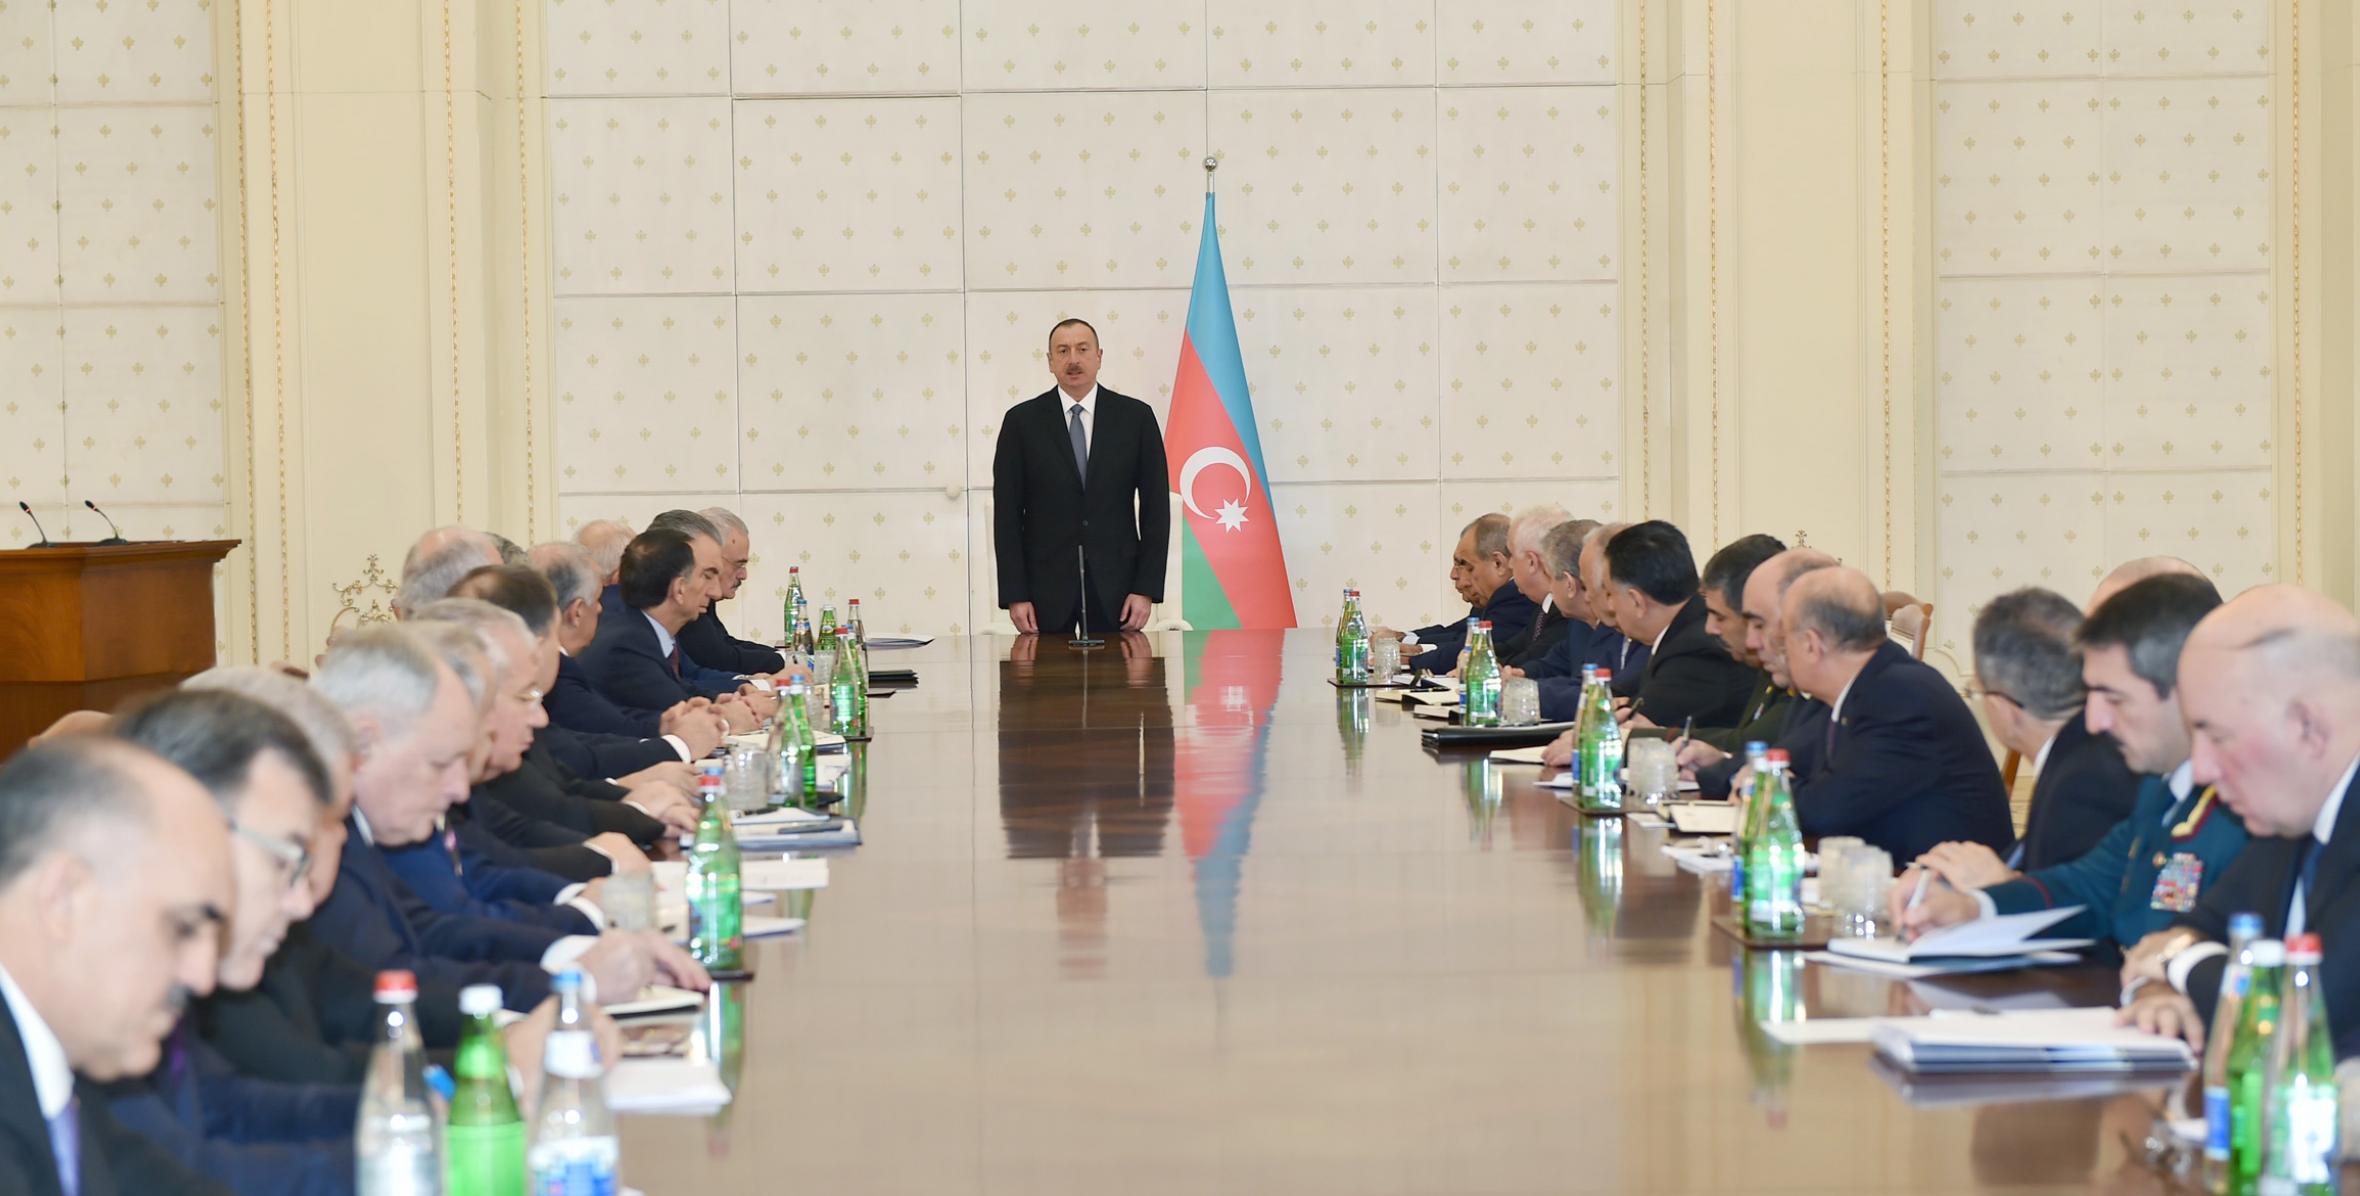 Opening speech by Ilham Aliyev at the meeting of the Cabinet of Ministers dedicated to the results of socioeconomic development of 2015 and objectives for the future